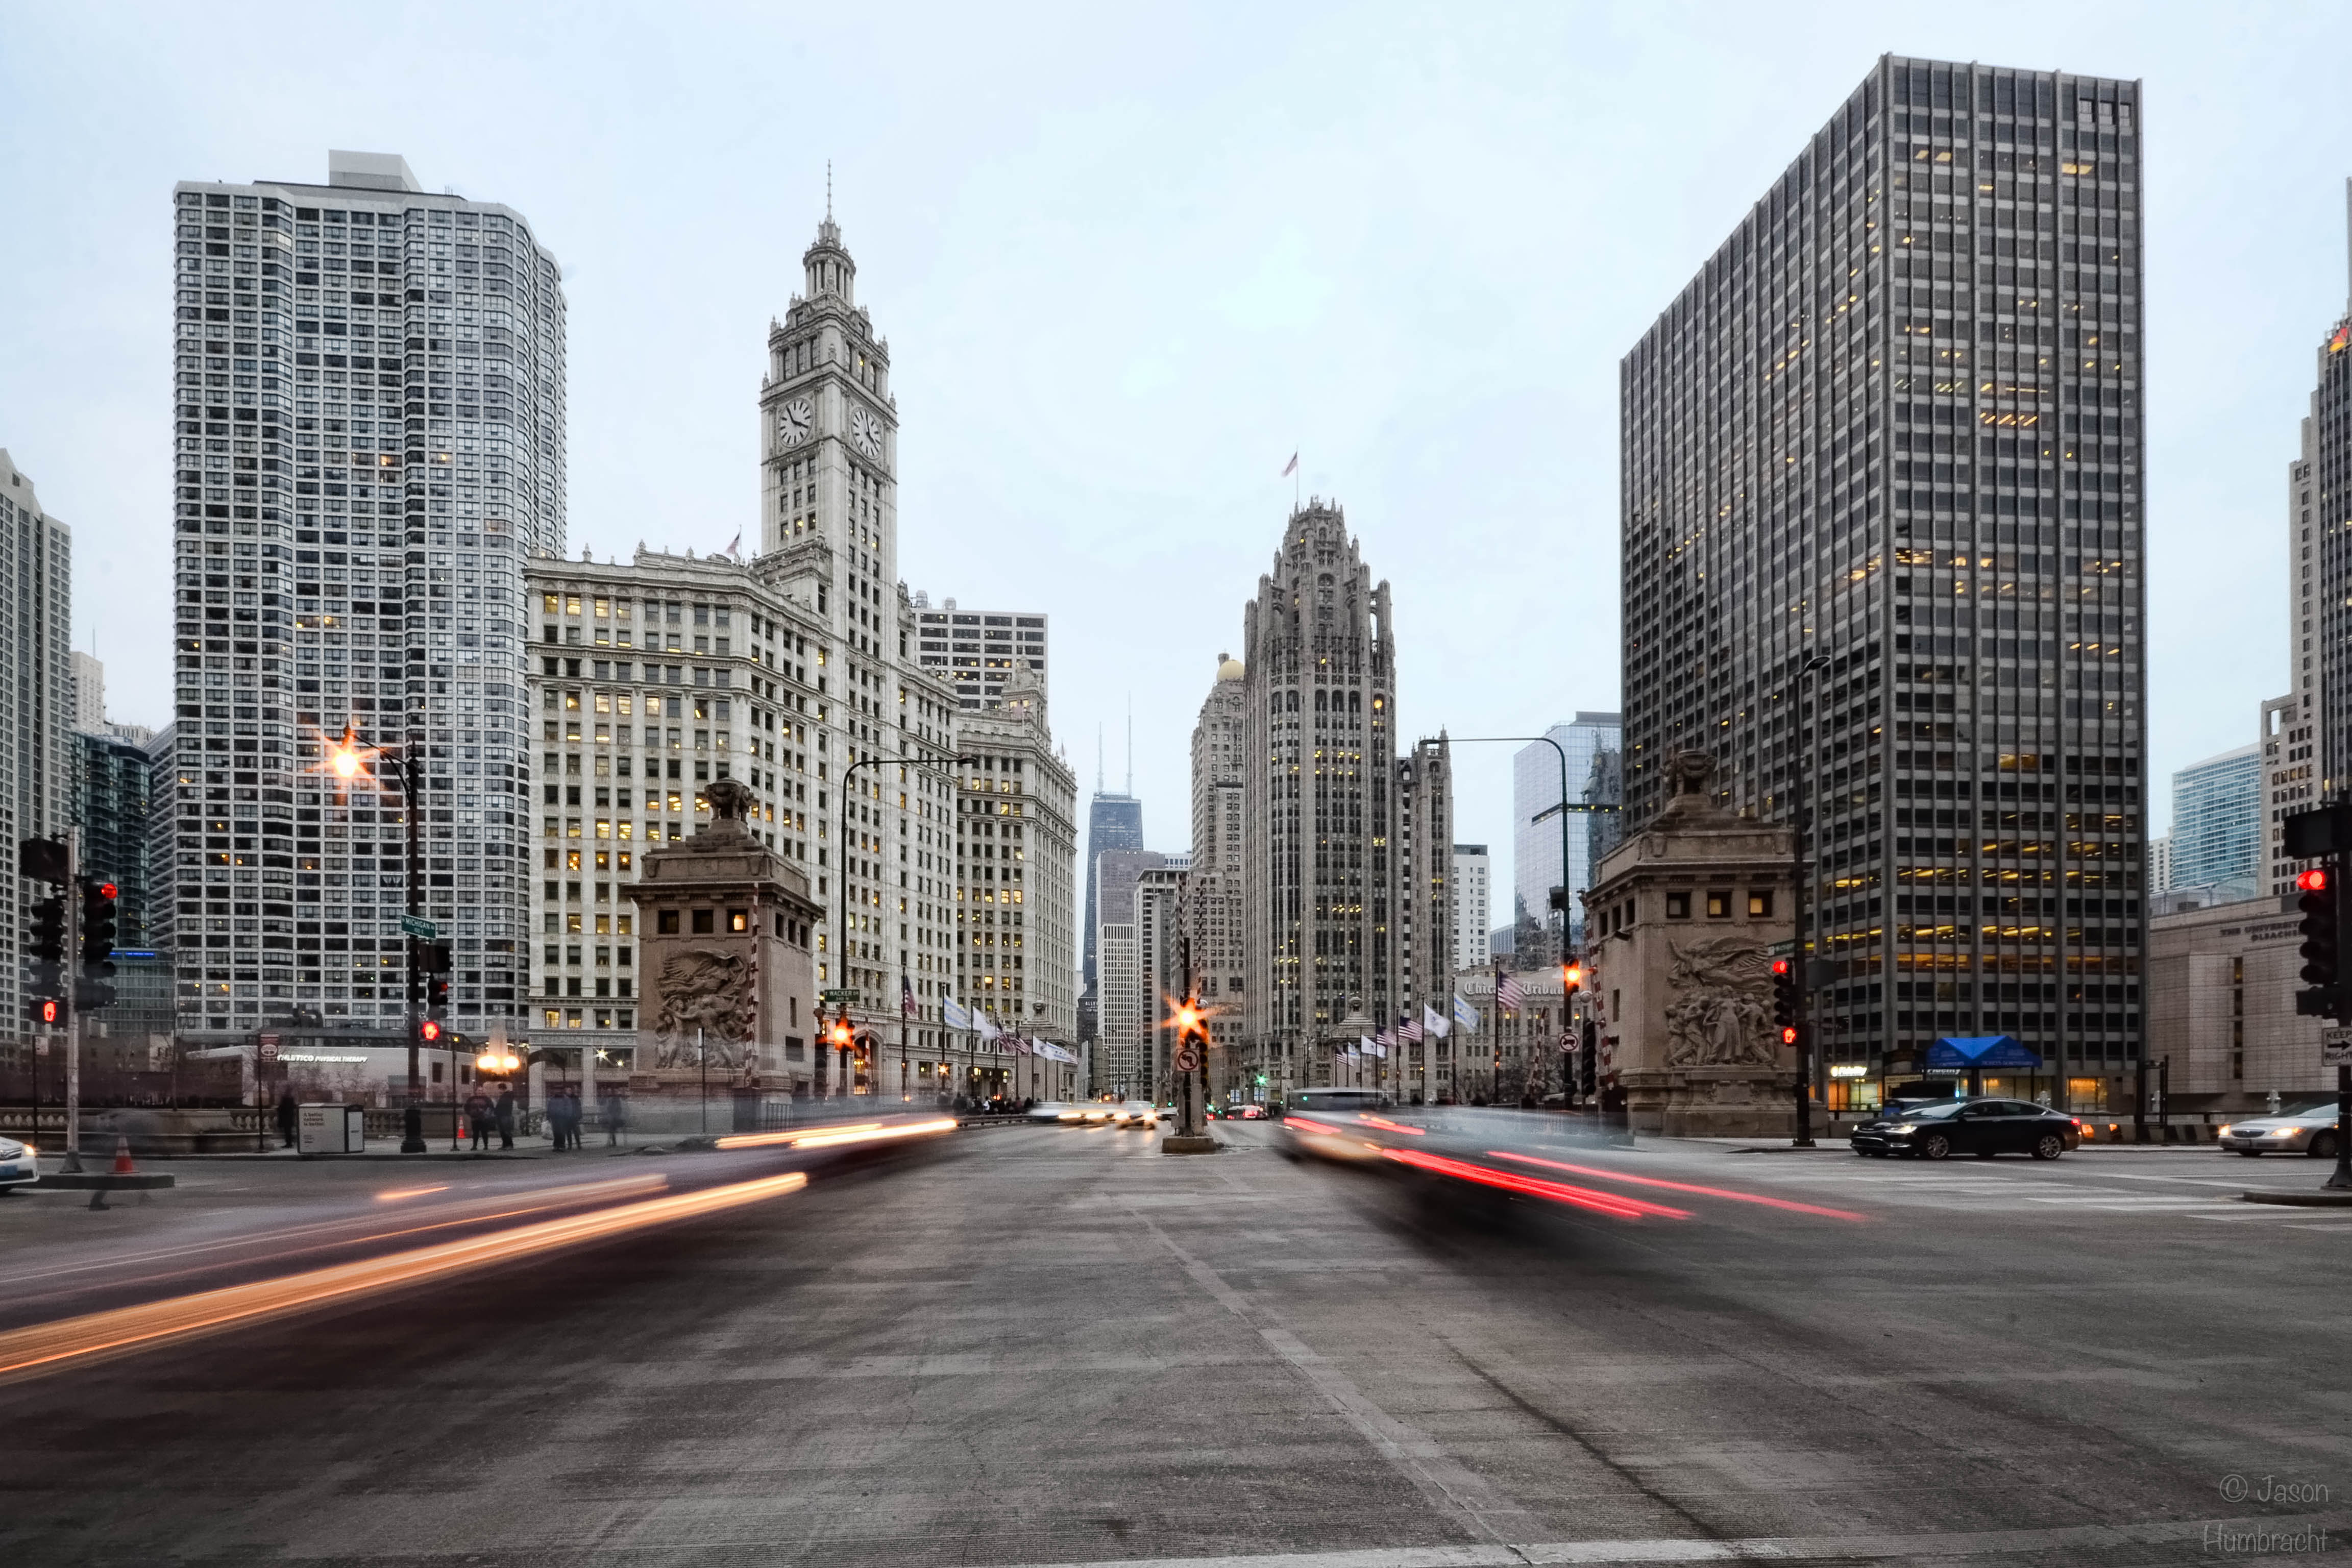 Chicago Traffic | Chicago Architecture | Light Trails | Michigan Ave | Skyscraper | Skyline | Image By Indiana Architectural Photographer Jason Humbracht